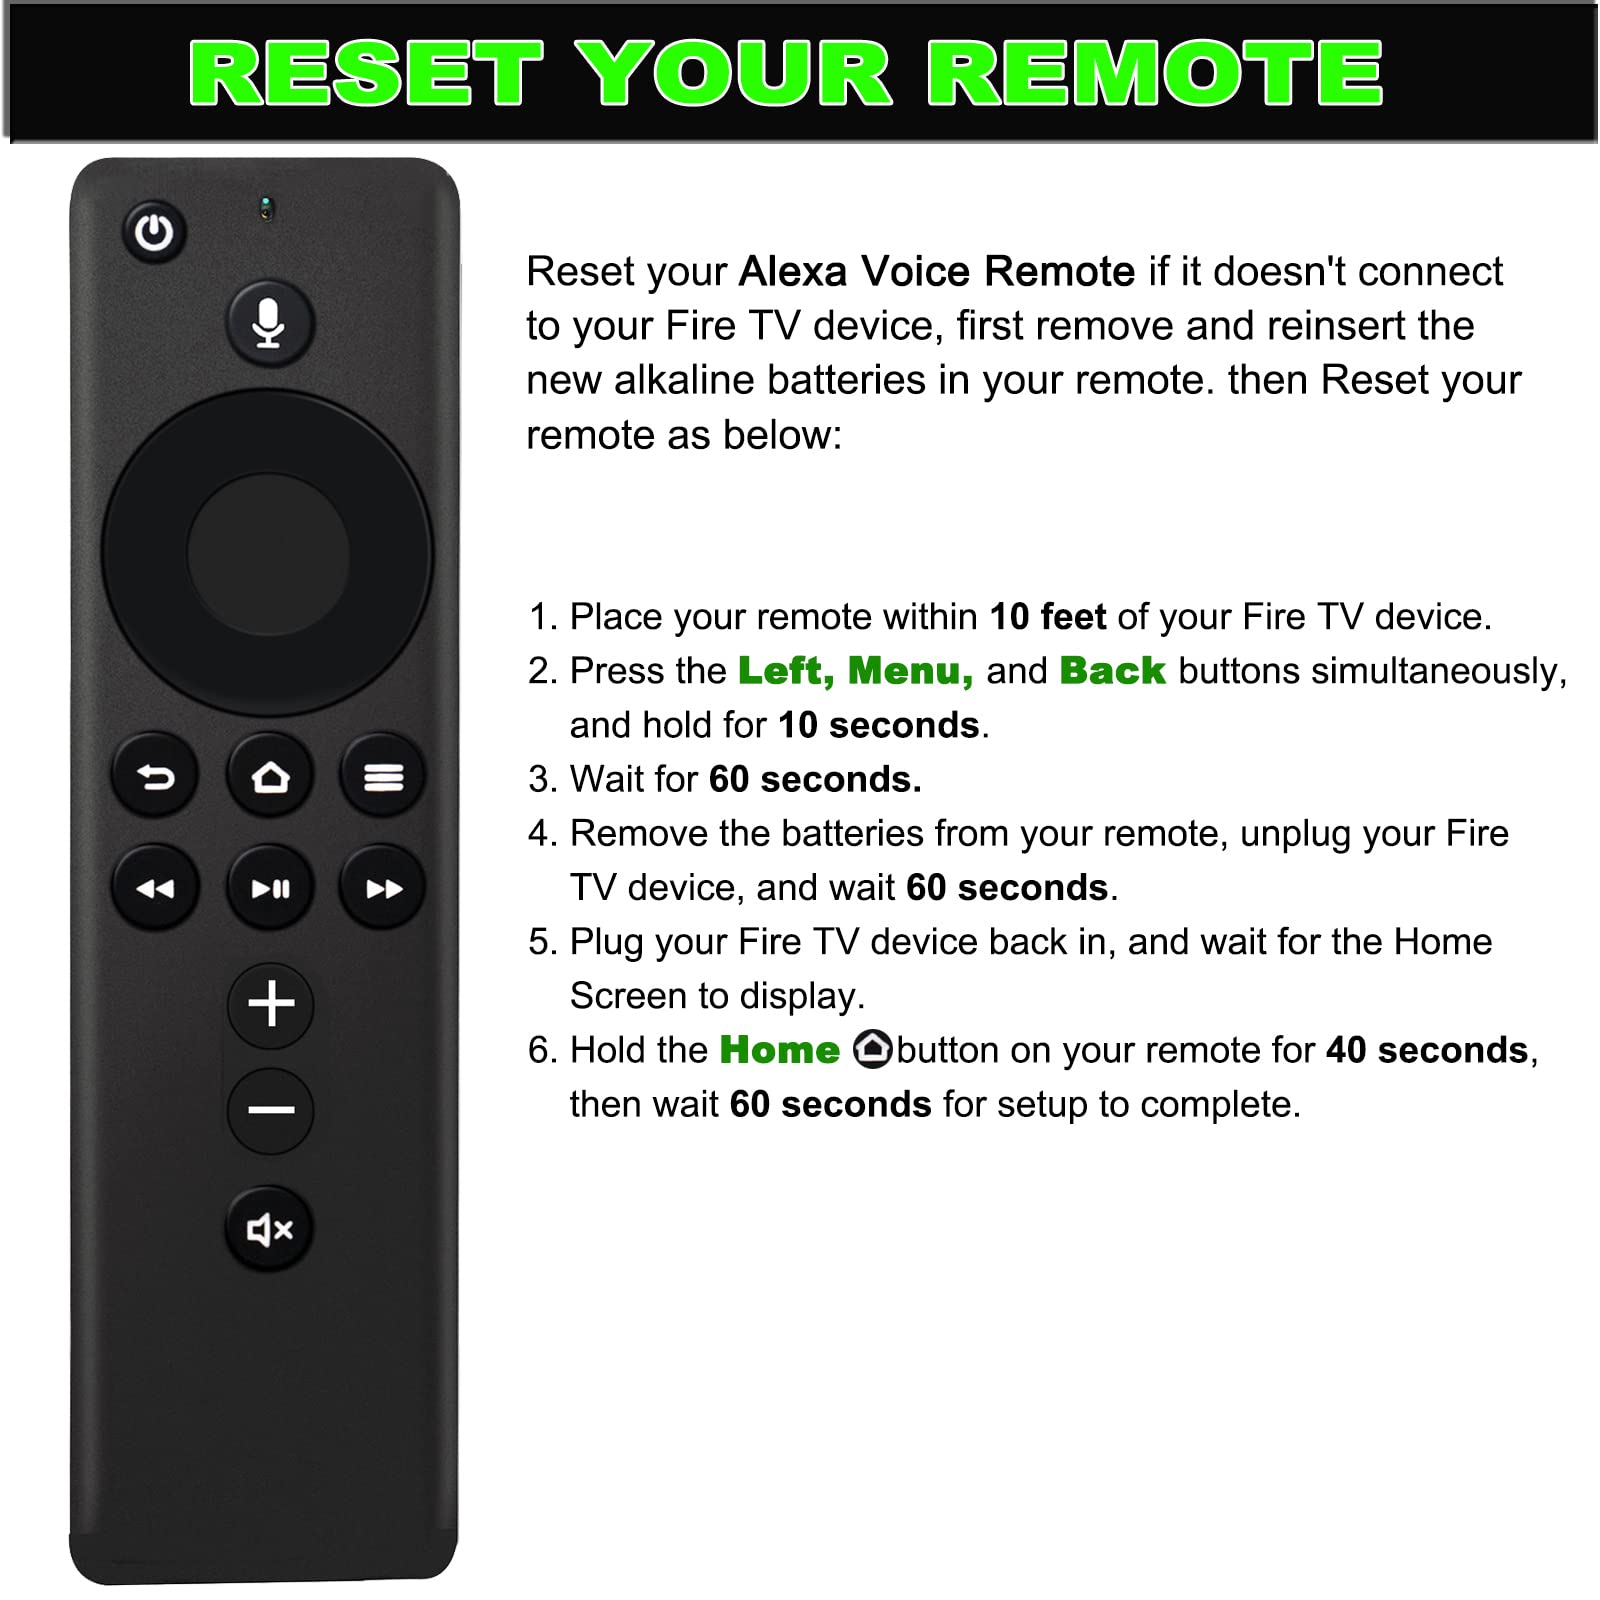 Check the Batteries
Open the battery compartment on the Firestick remote